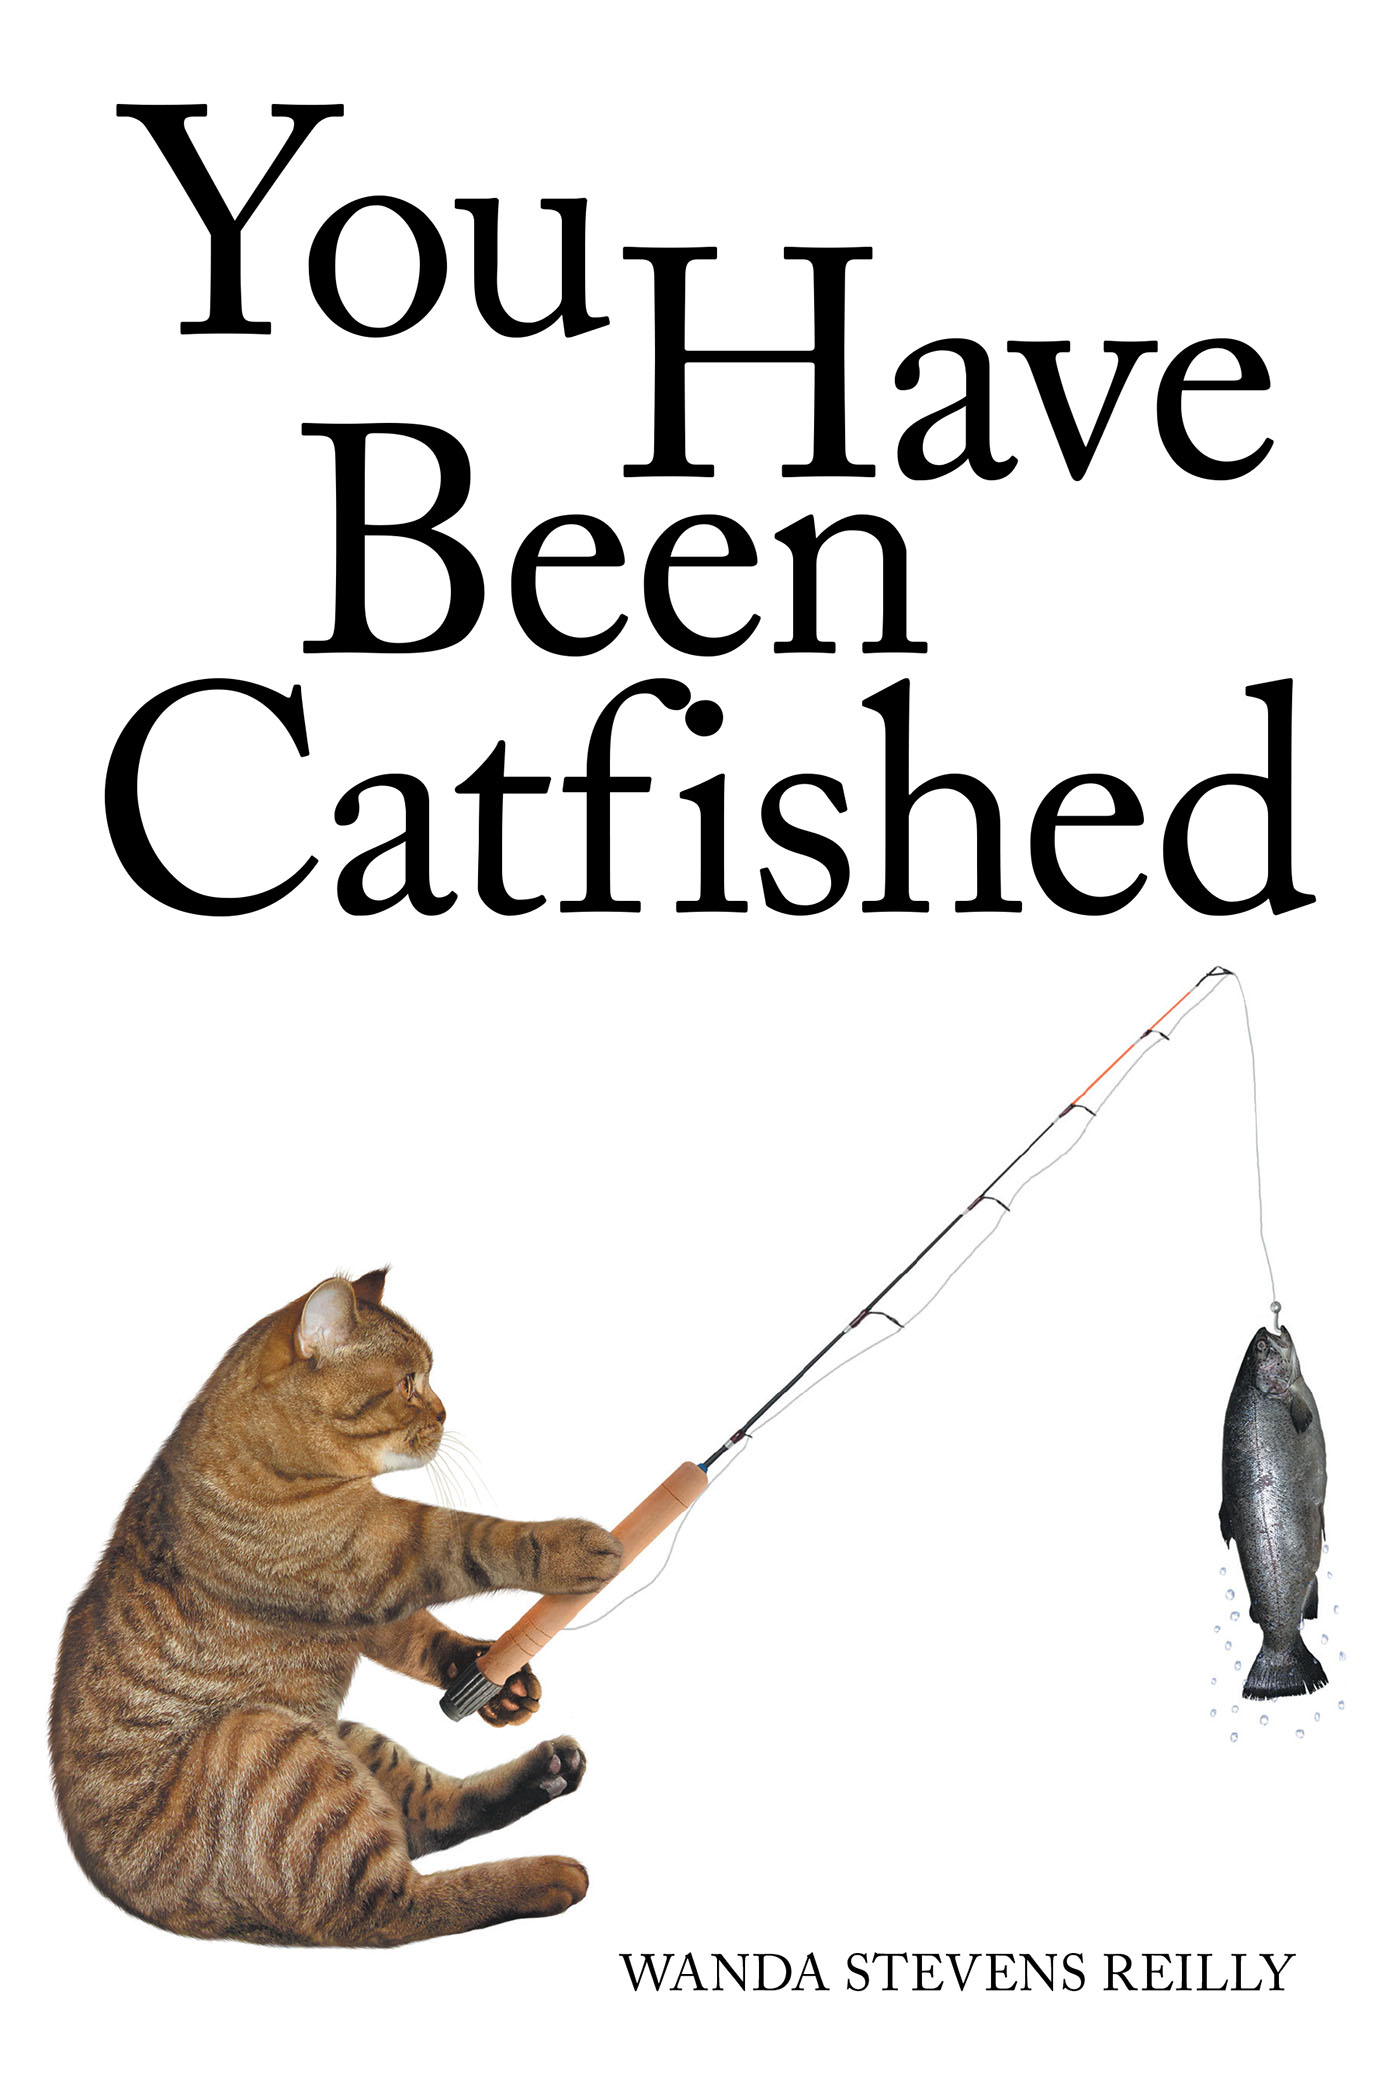 Author Wanda Stevens Reilly’s New Book, "You Have Been Catfished," is the Story of How She Was Catfished and a Way to Warn Others of This Happening to Them